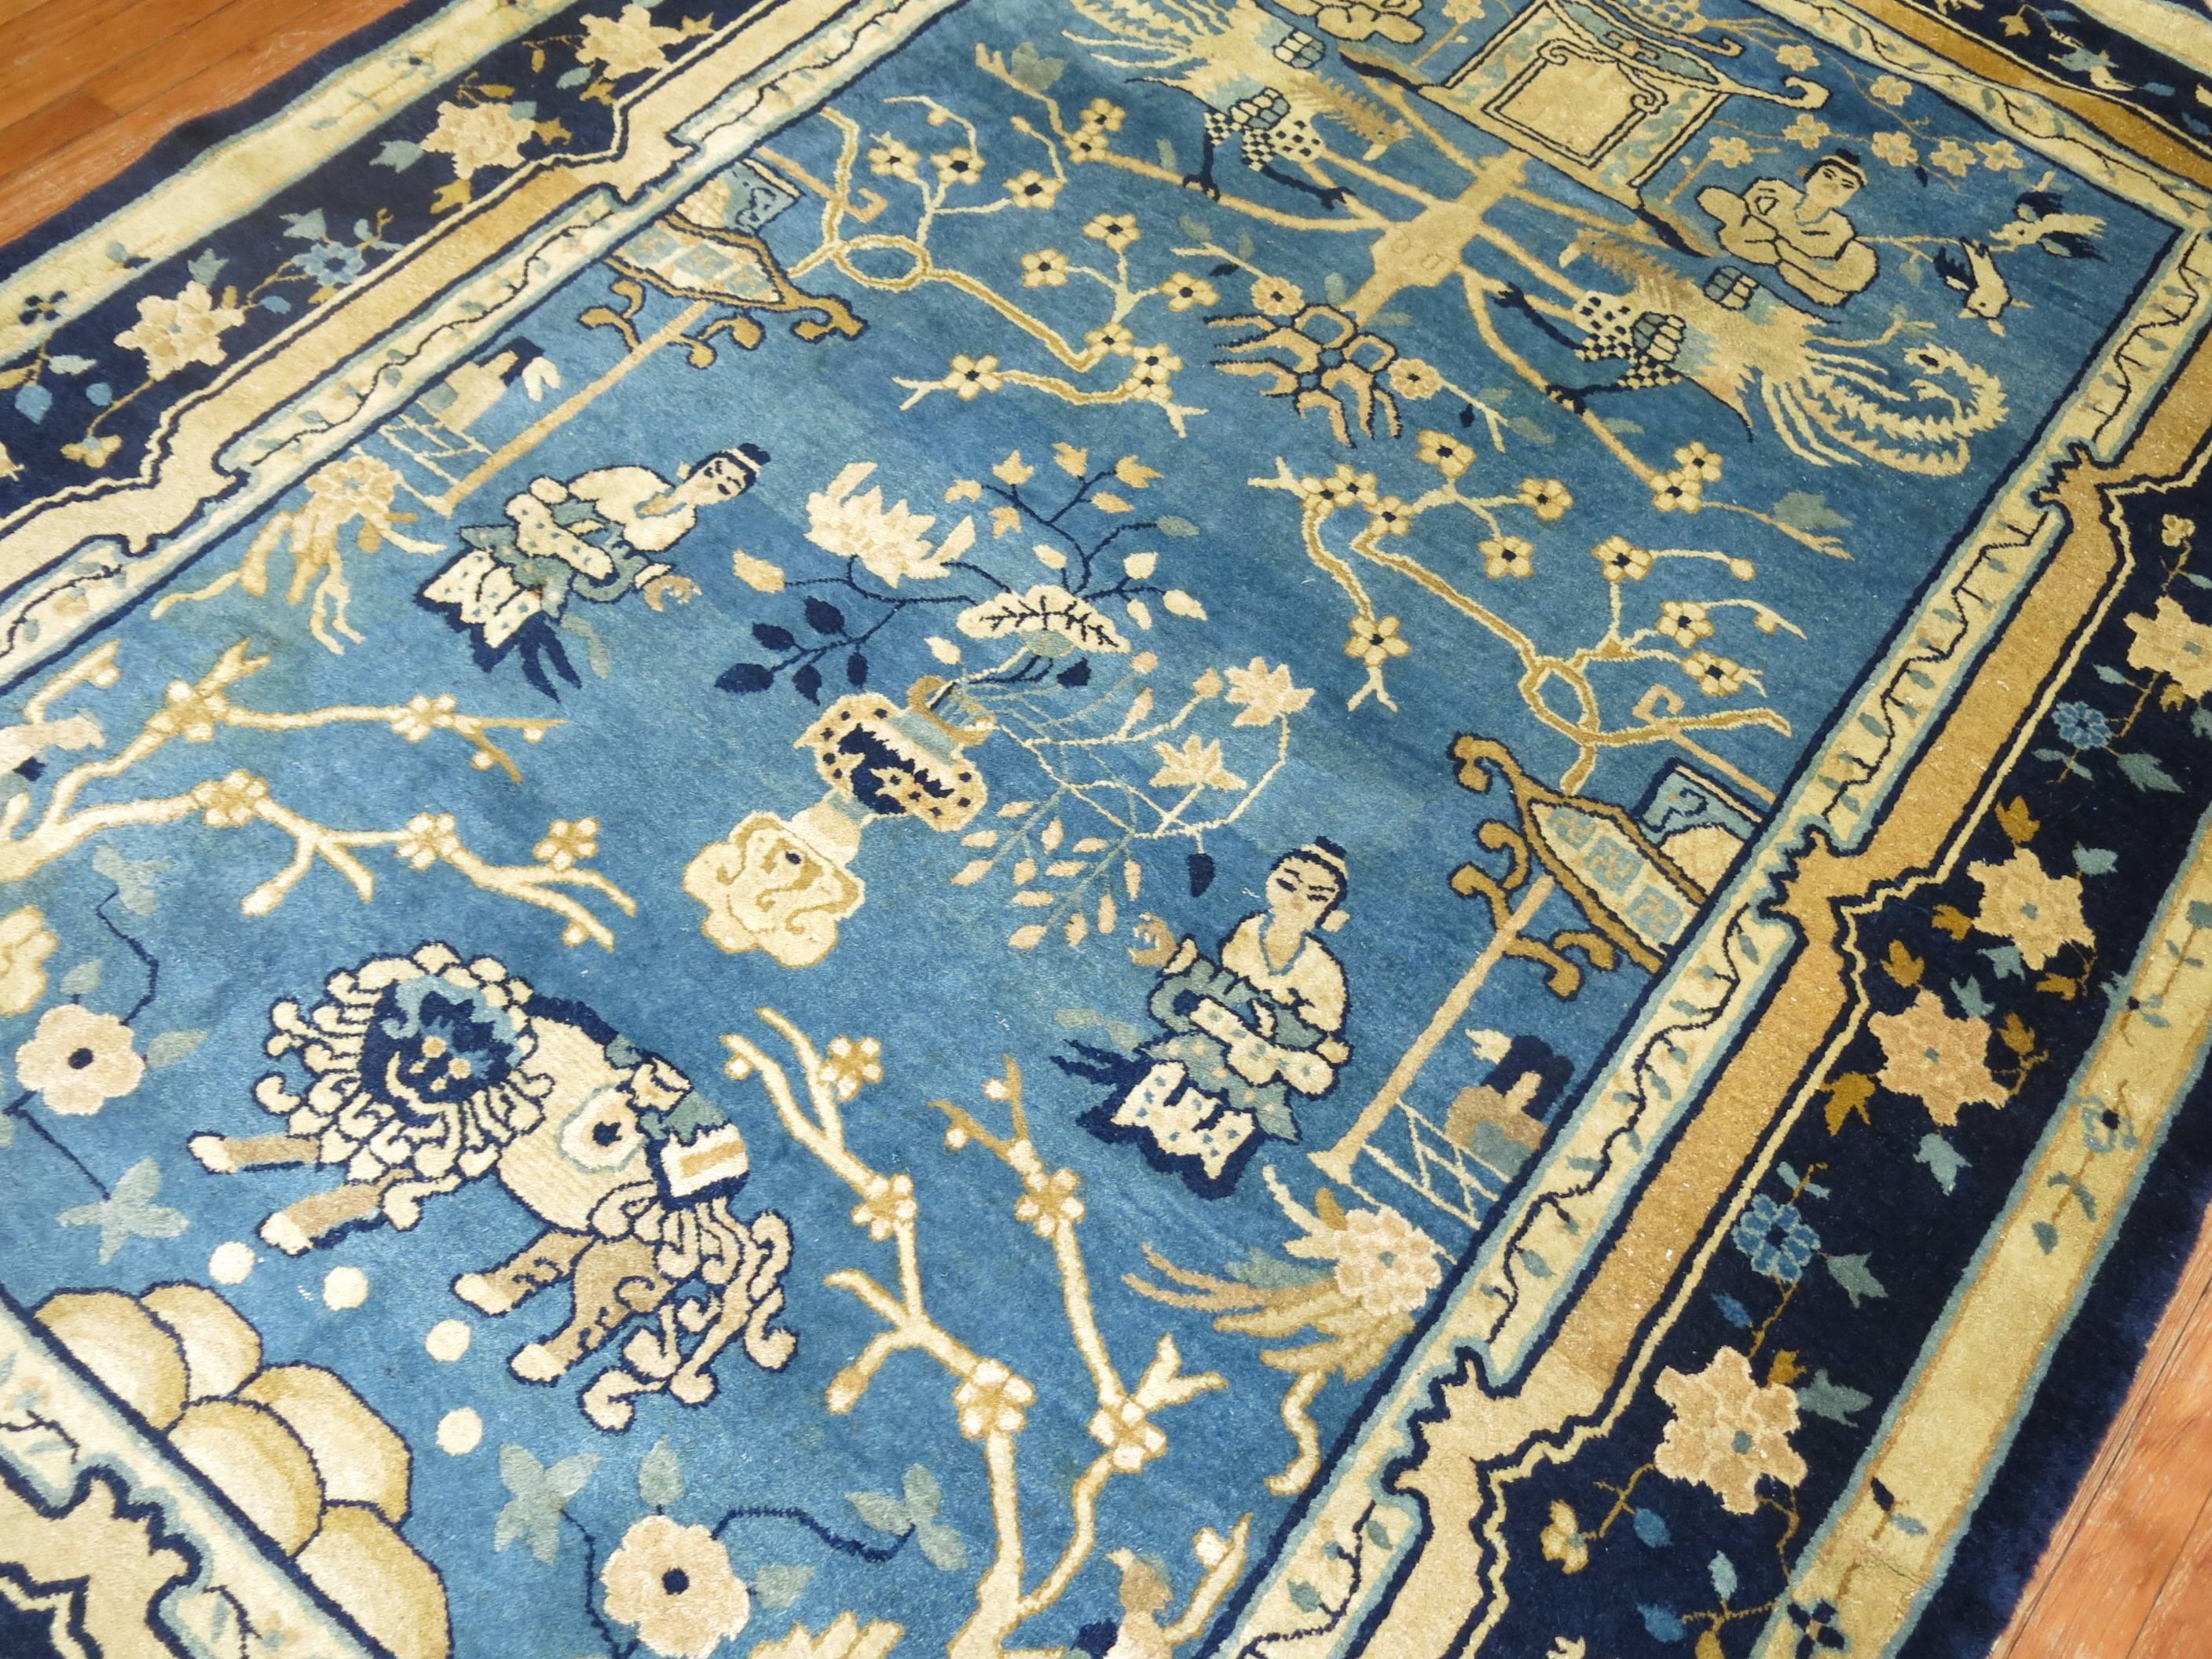 Phenomenal Rare Size Chinese Peking rug in beautiful Blue Color. 

6' x 8'6''

This is a one of a kind antique rug hand woven of 100% wool in China around the early 20th century. This rug was personally selected for the combination of excellent